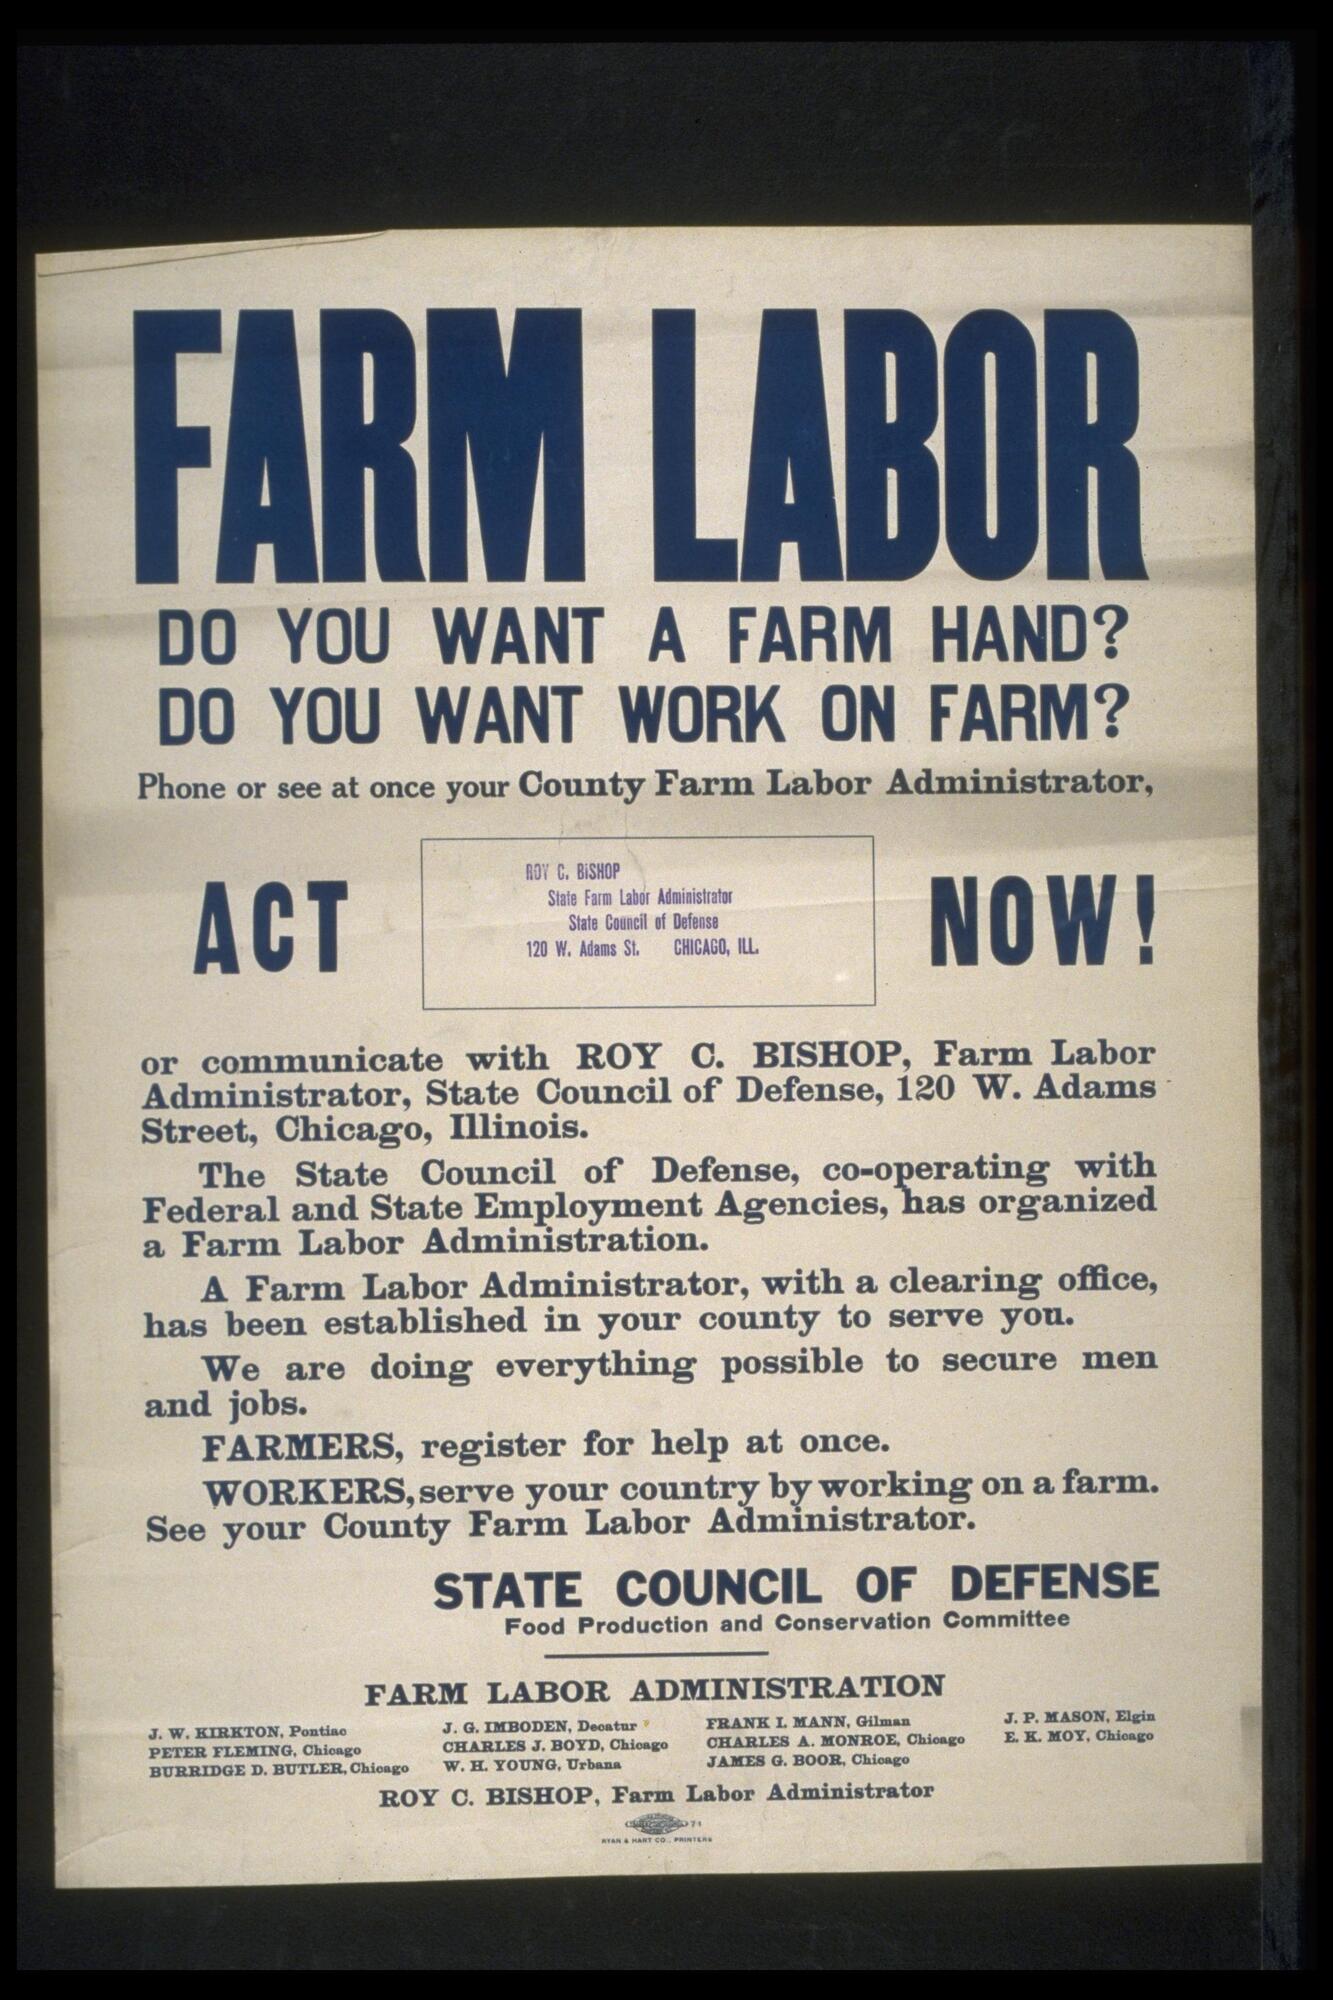 Text: FARM LABOR - Do You Want a Farm Hand? Do You Want Work on Farm? Phone or see at once your County Farm Labor Administrator, ACT NOW! - (stamp inset) Roy C. Bishop State Farm Labor Administrator State Council of Defense 120 W. Adams St. Chicago, ILL - or communicate with Roy C. Bishop, Farm Labor Administrator, State Council of Defense, 120 W. Adams Street, Chicago, Illinois. - The State Council of Defense, co-operating with Federal and State Employment Agencies, has organized a Farm Labor Administration. - A Farm Labor Administrator, with a clearing office, has been established in your county to serve you. - We are doing everything possible to secure men and jobs. - FARMERS, register for help at once - WORKERS, serve your country by working on a farm. See your County Farm Labor Administrator. - STATE COUNCIL OF DEFENSE - Food Production and Conservation Committee - Farm Labor Administration - (left to right) J.W. Kirkton, Pontiac; Peter Fleming, Chicago; Burridge B. Butler, Chicago; J.G. Imboden, Decatur